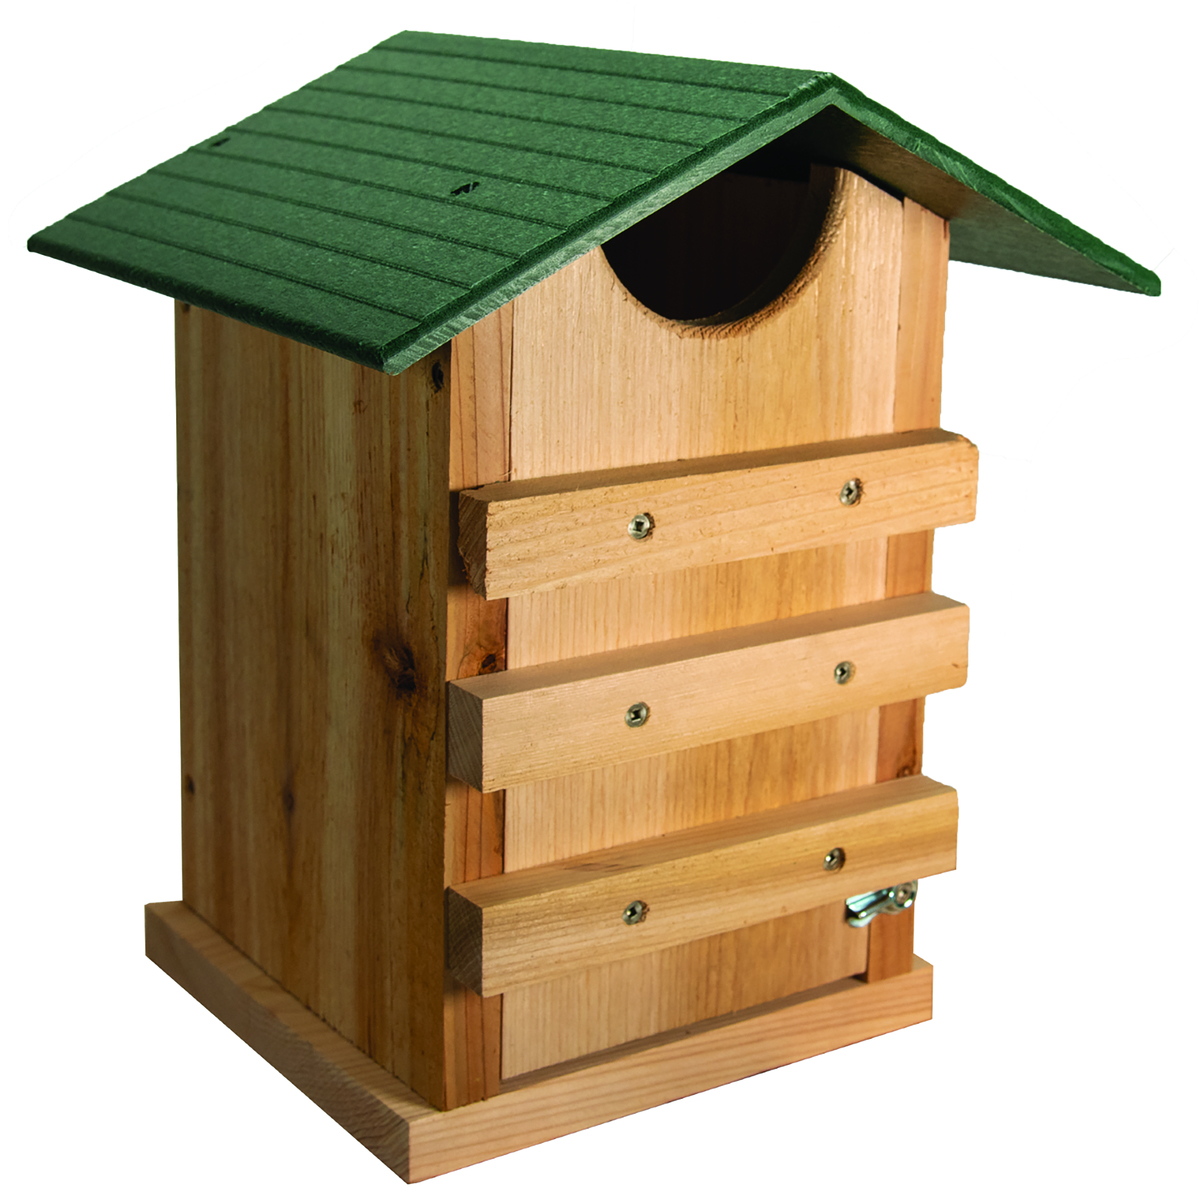 Picture of Americas Favorite 556115 12.96 x 15 x 11.04 in. Green Screech Owl House - MP30